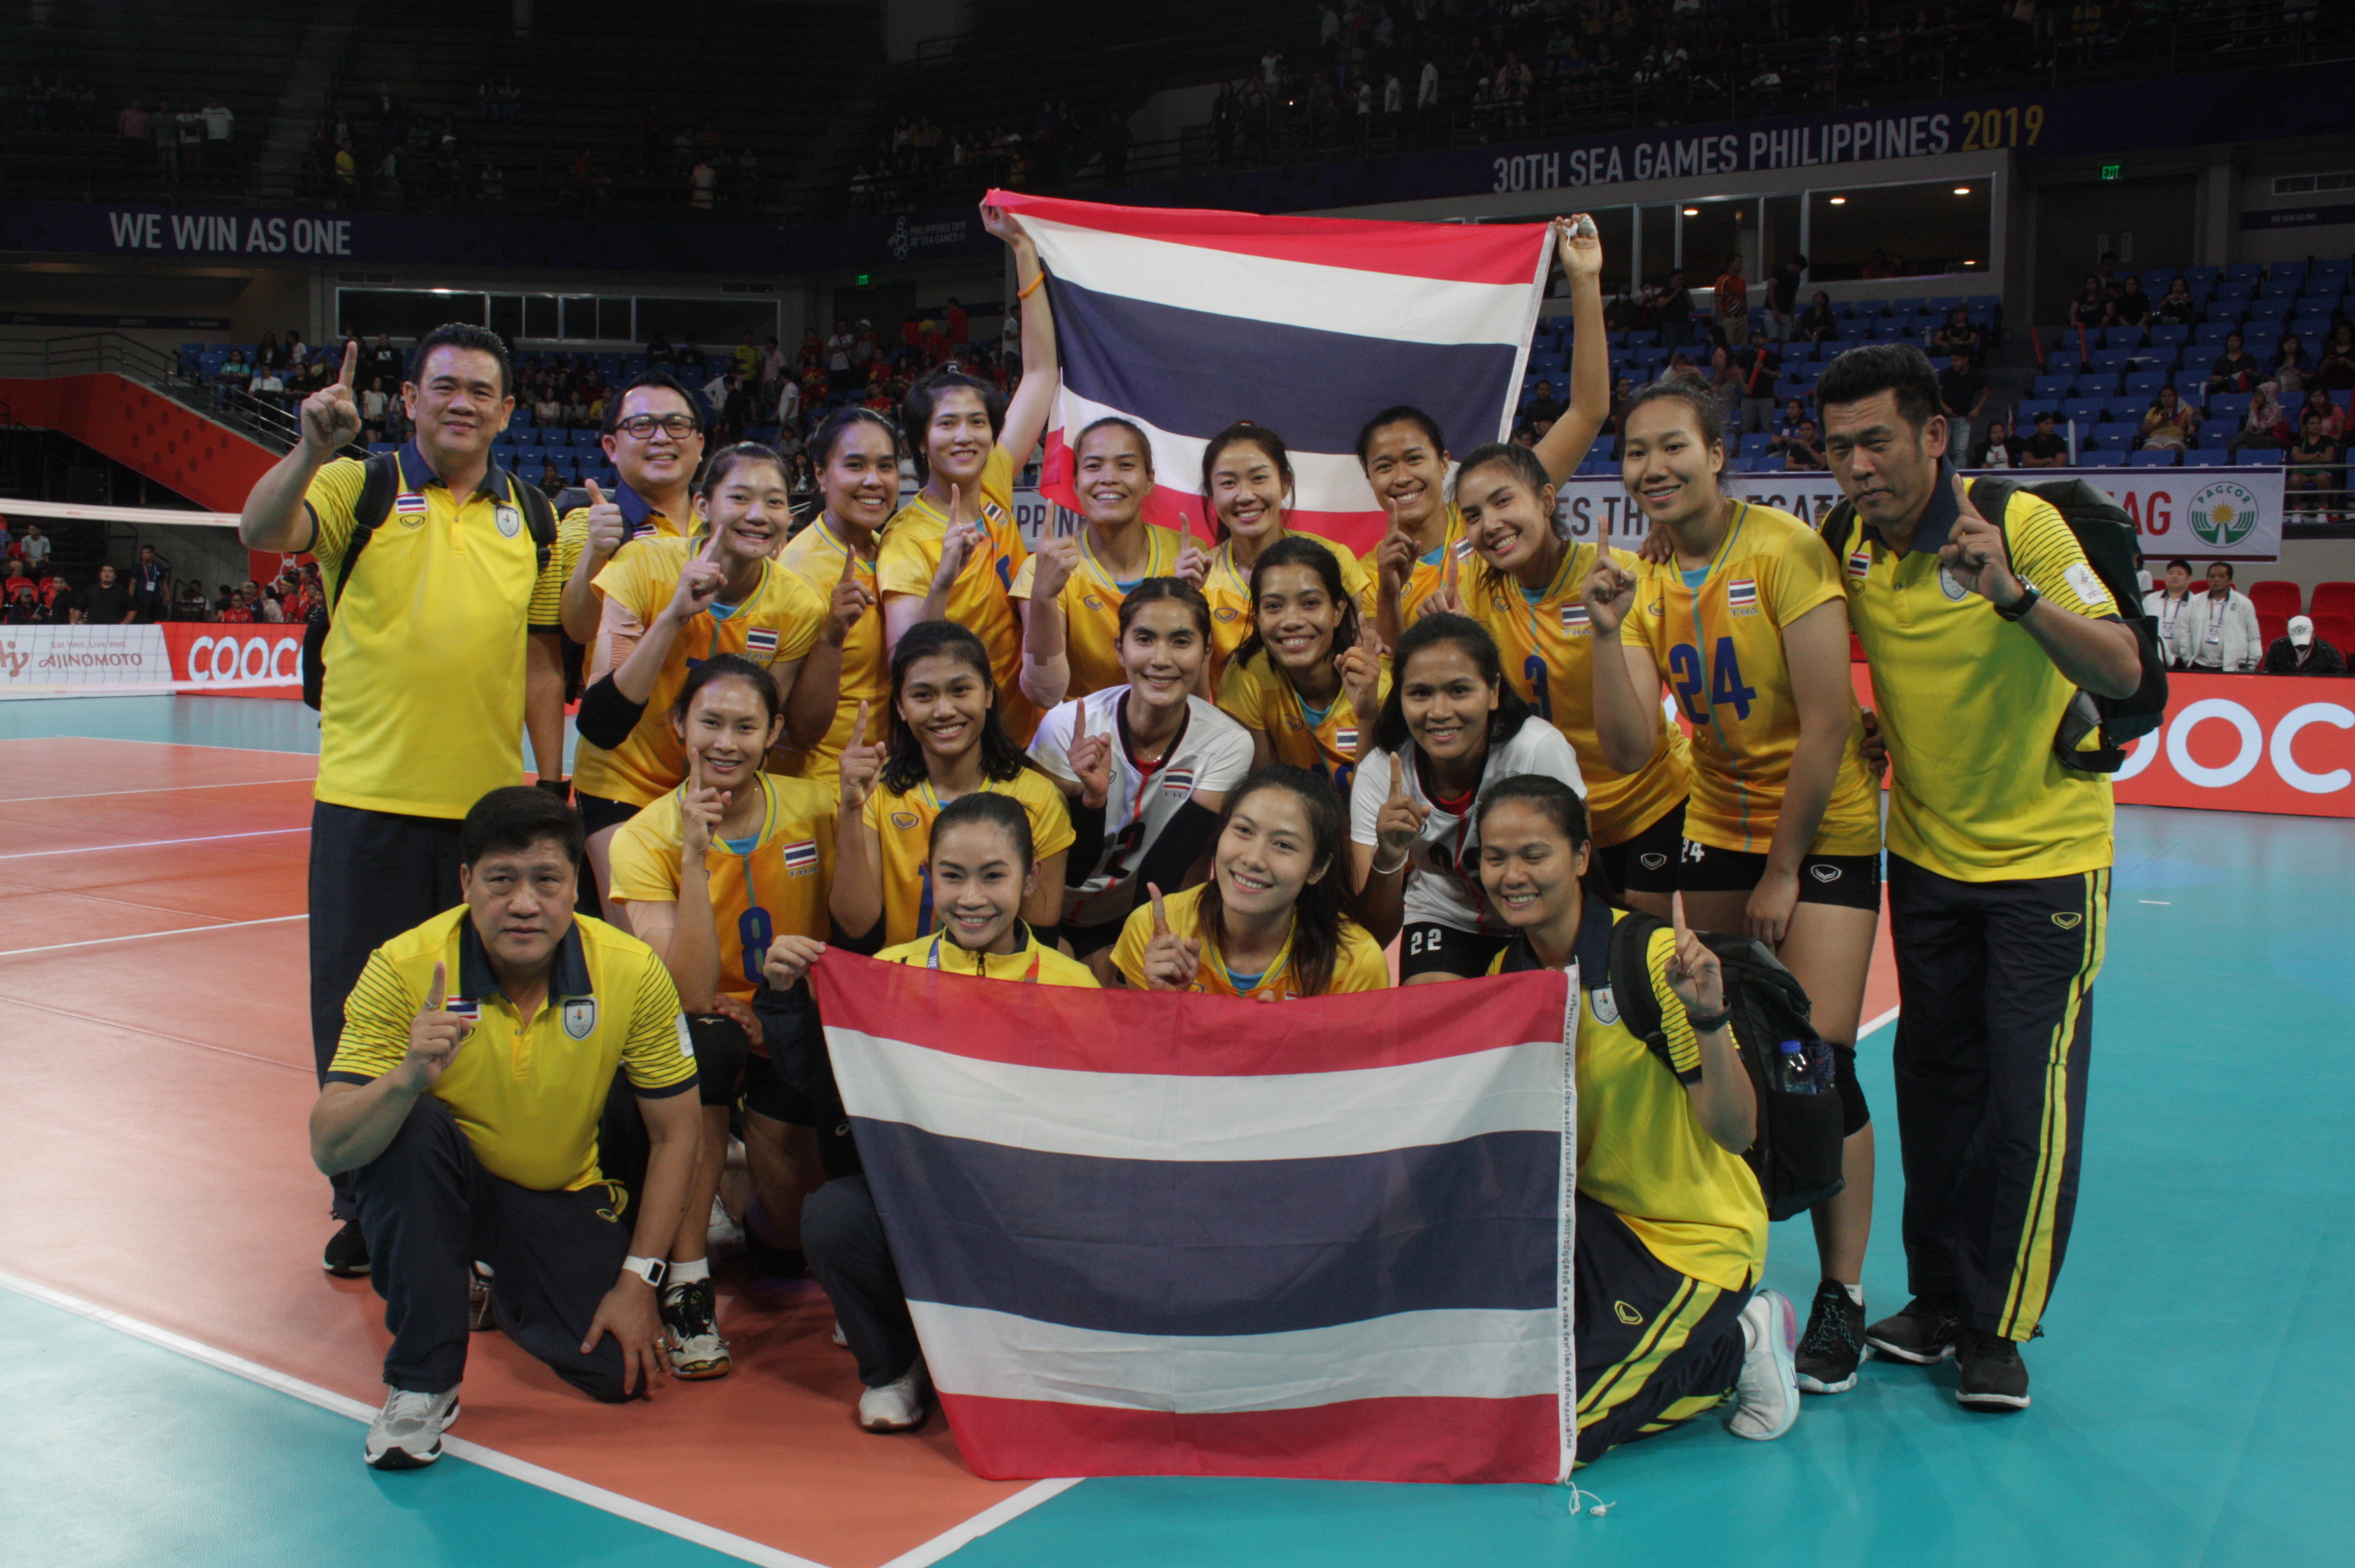 THAILAND STRETCH THEIR REMARKABLE SEA GAMES SUCCESS TO UNCHALLENGED 14